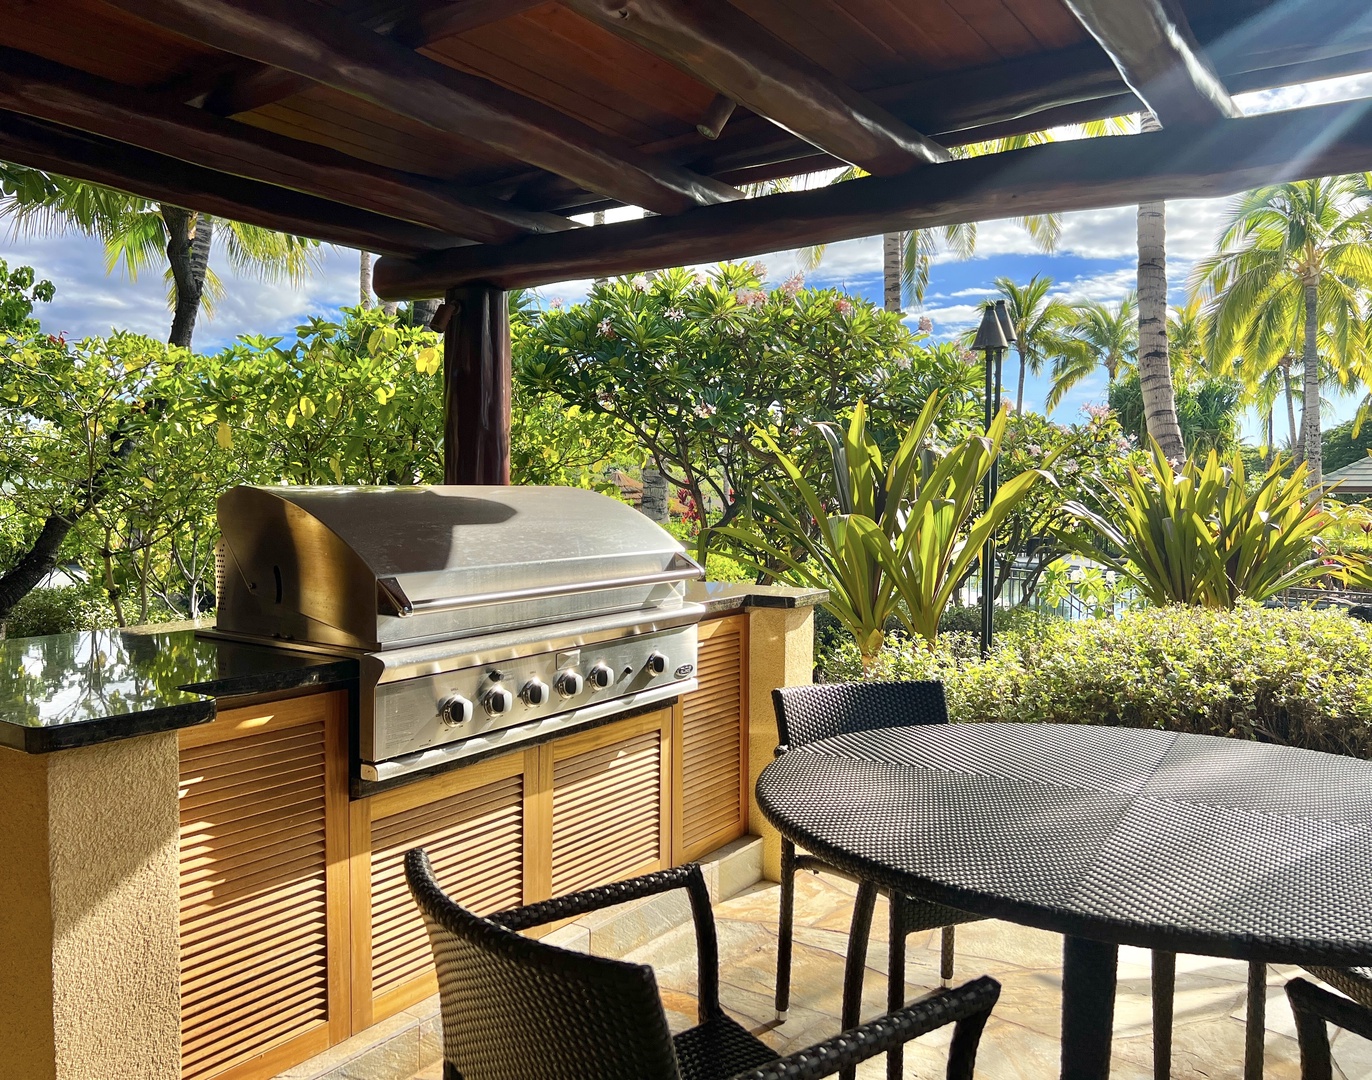 Kamuela Vacation Rentals, 3BD OneOcean (1C) at Mauna Lani Resort - "Sports & Wellness Club and Hana Pono Park" community area with gas grill.